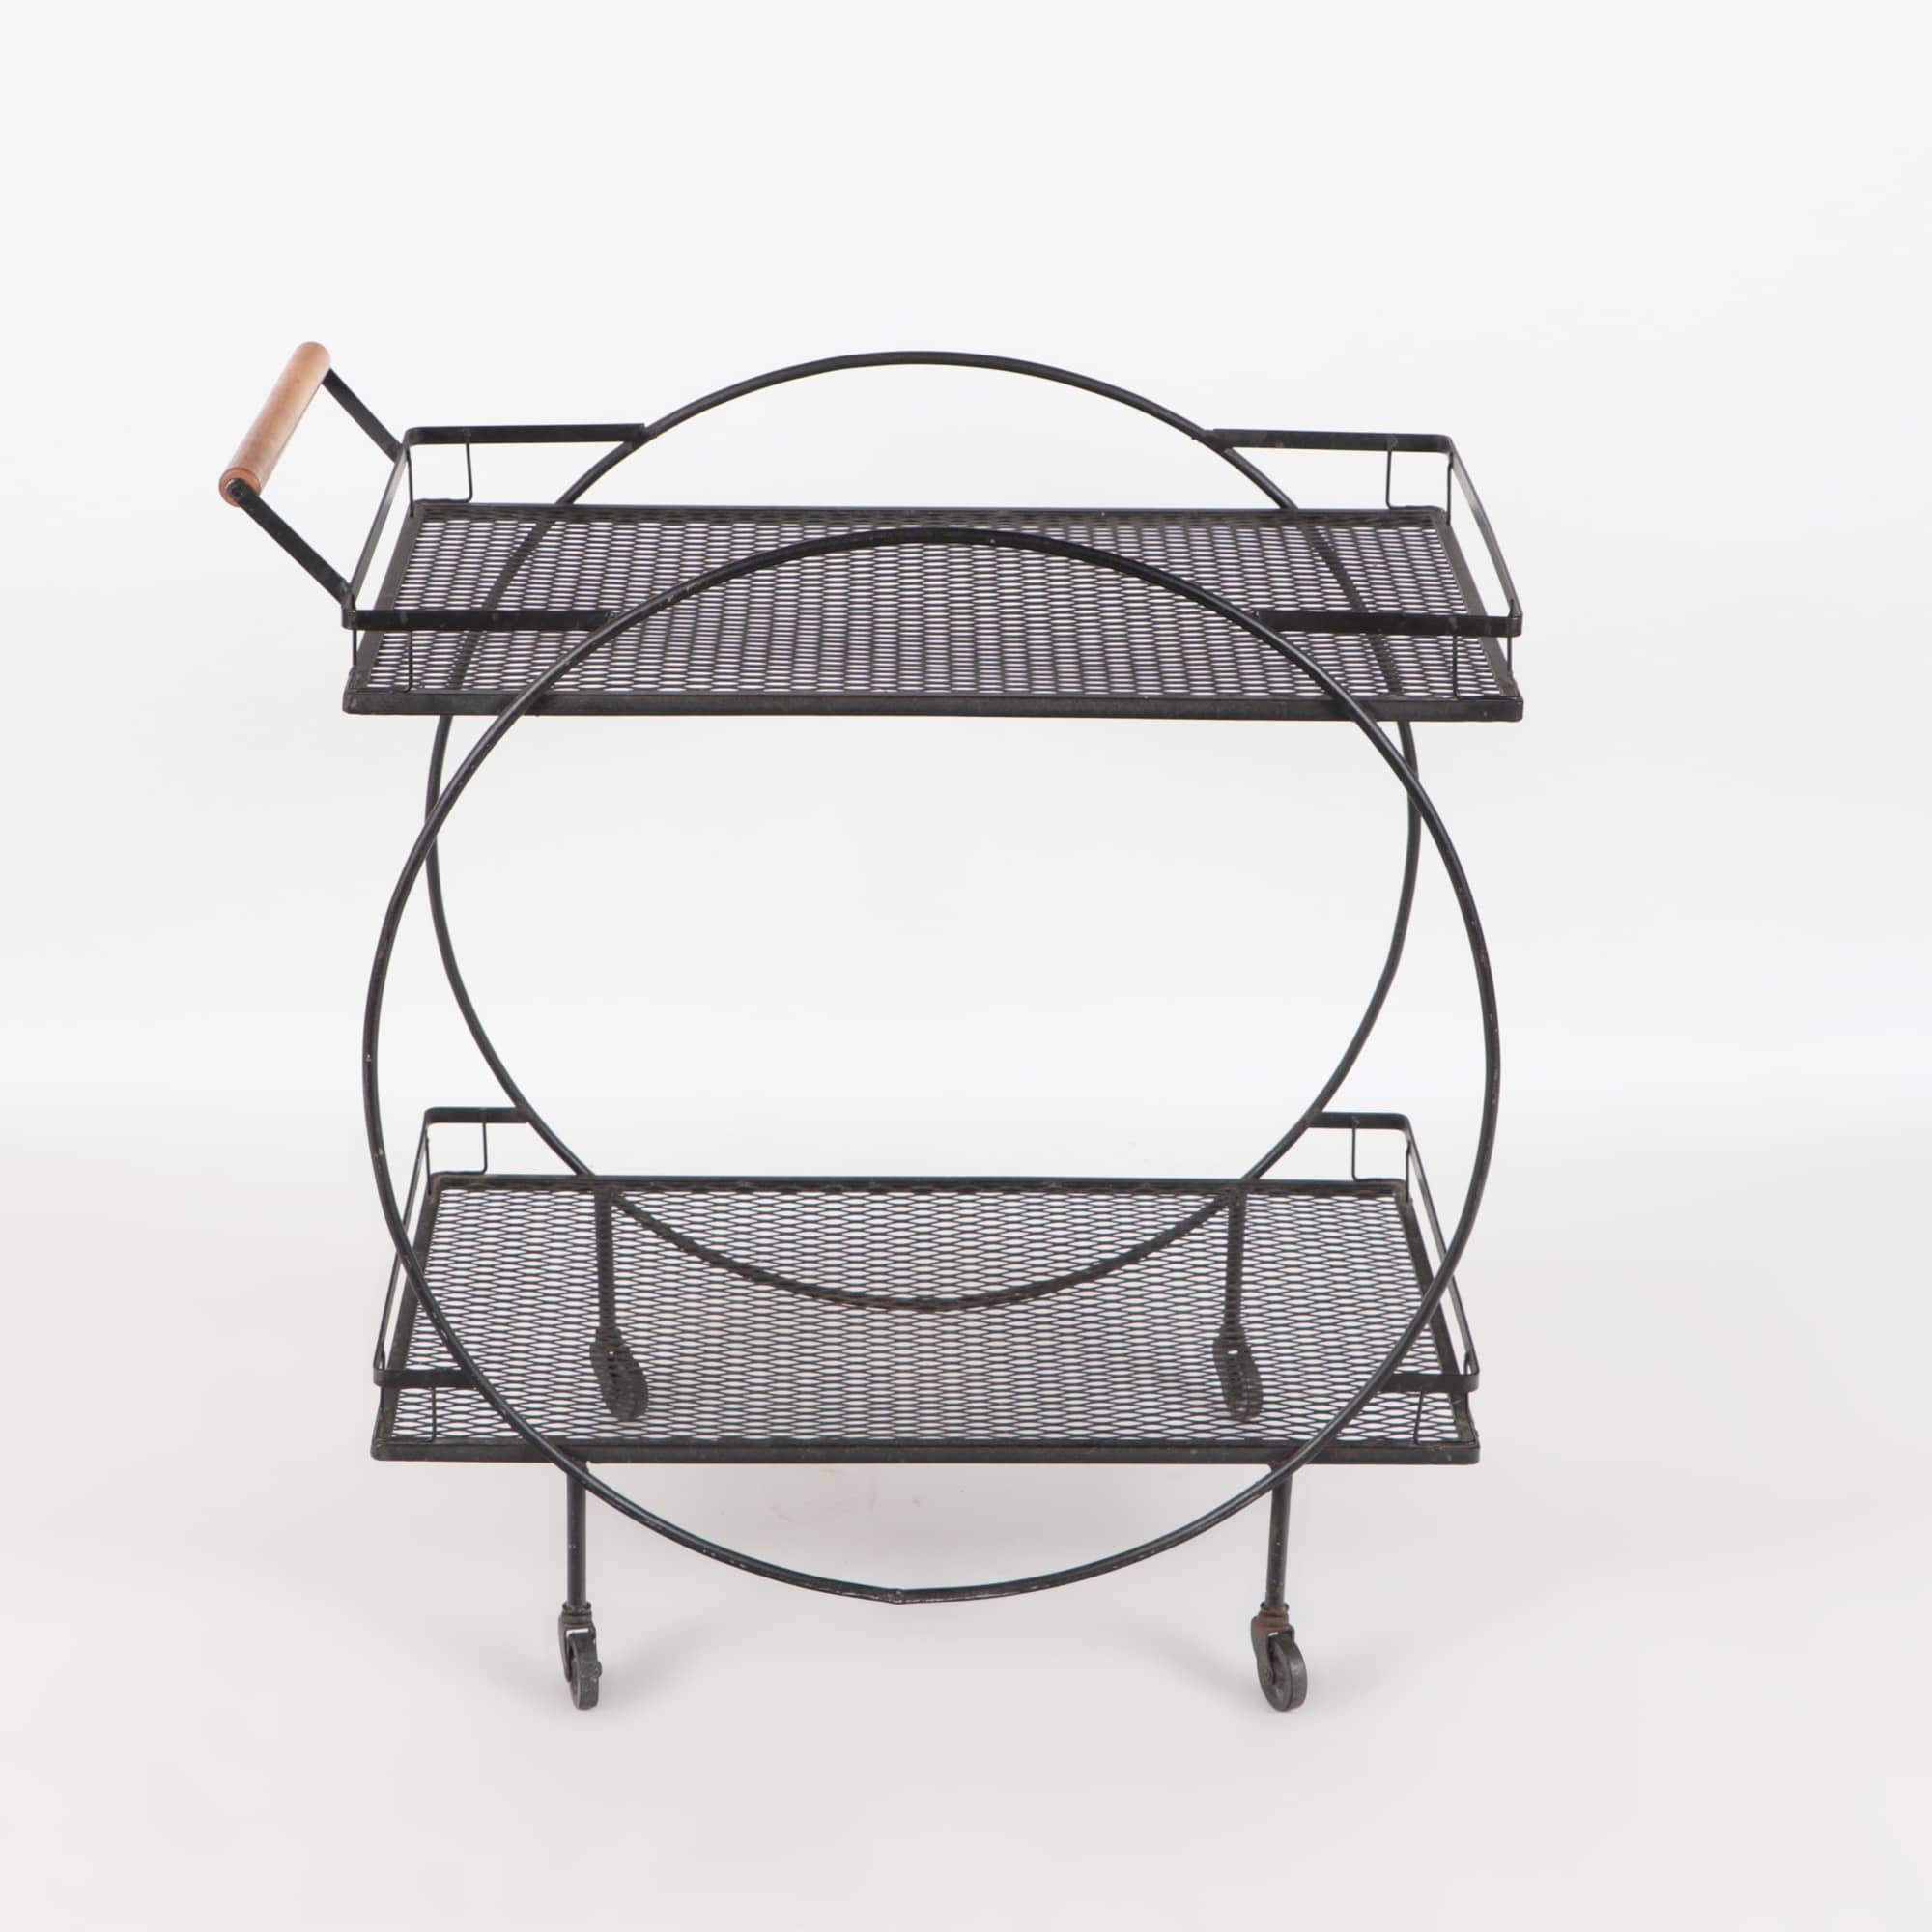 A Mid-Century Modern Salterini Maurizio Tempestini wrought iron bar or serving cart having a circular black frame with two metal mesh shelves all supported by four rubber casters. The round handle bar is fashioned from maple circa 1950.